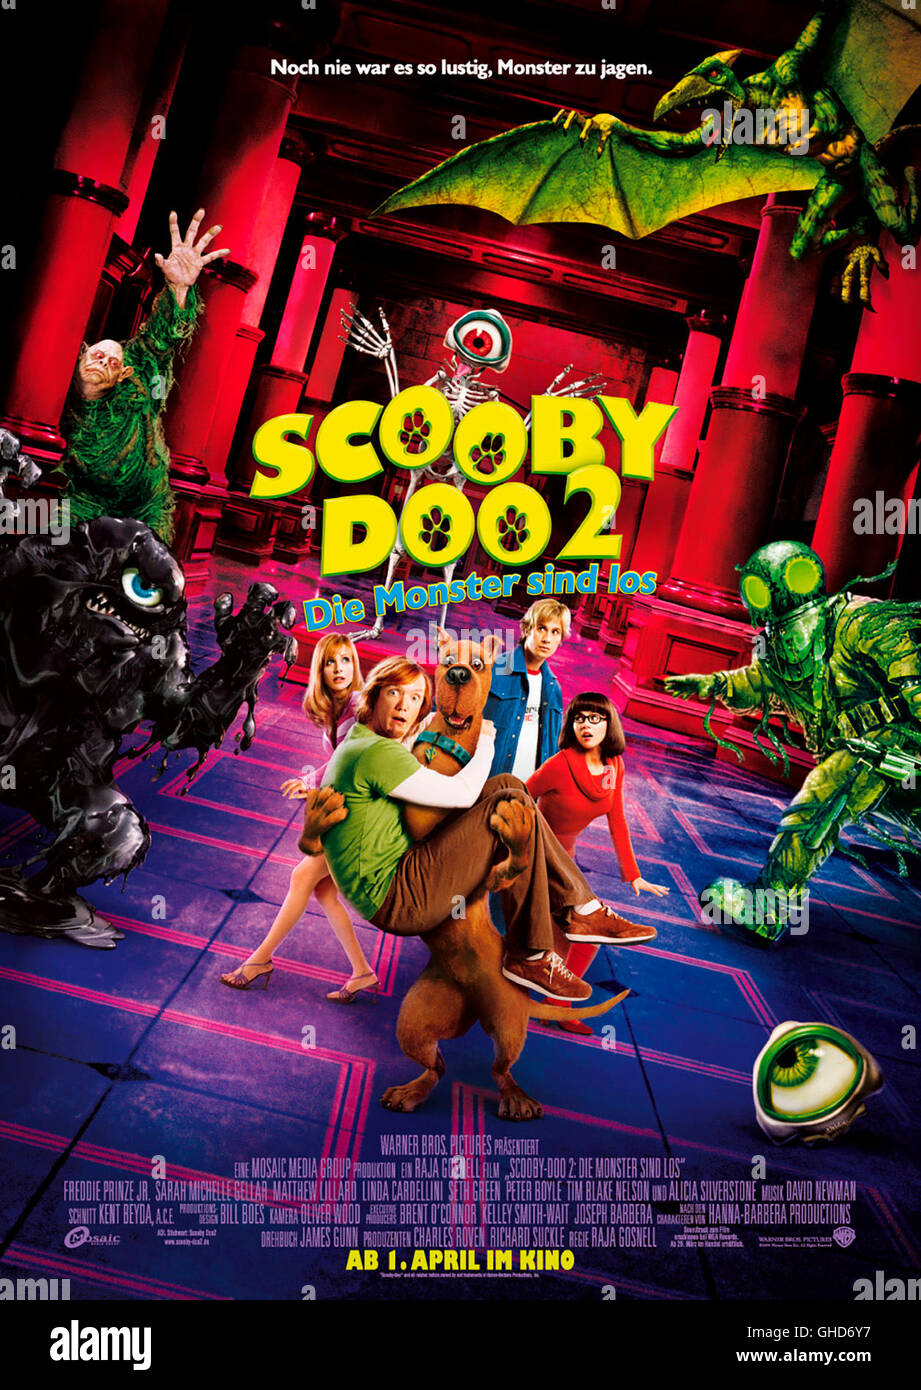 scooby doo 2 monsters unleashed full movie